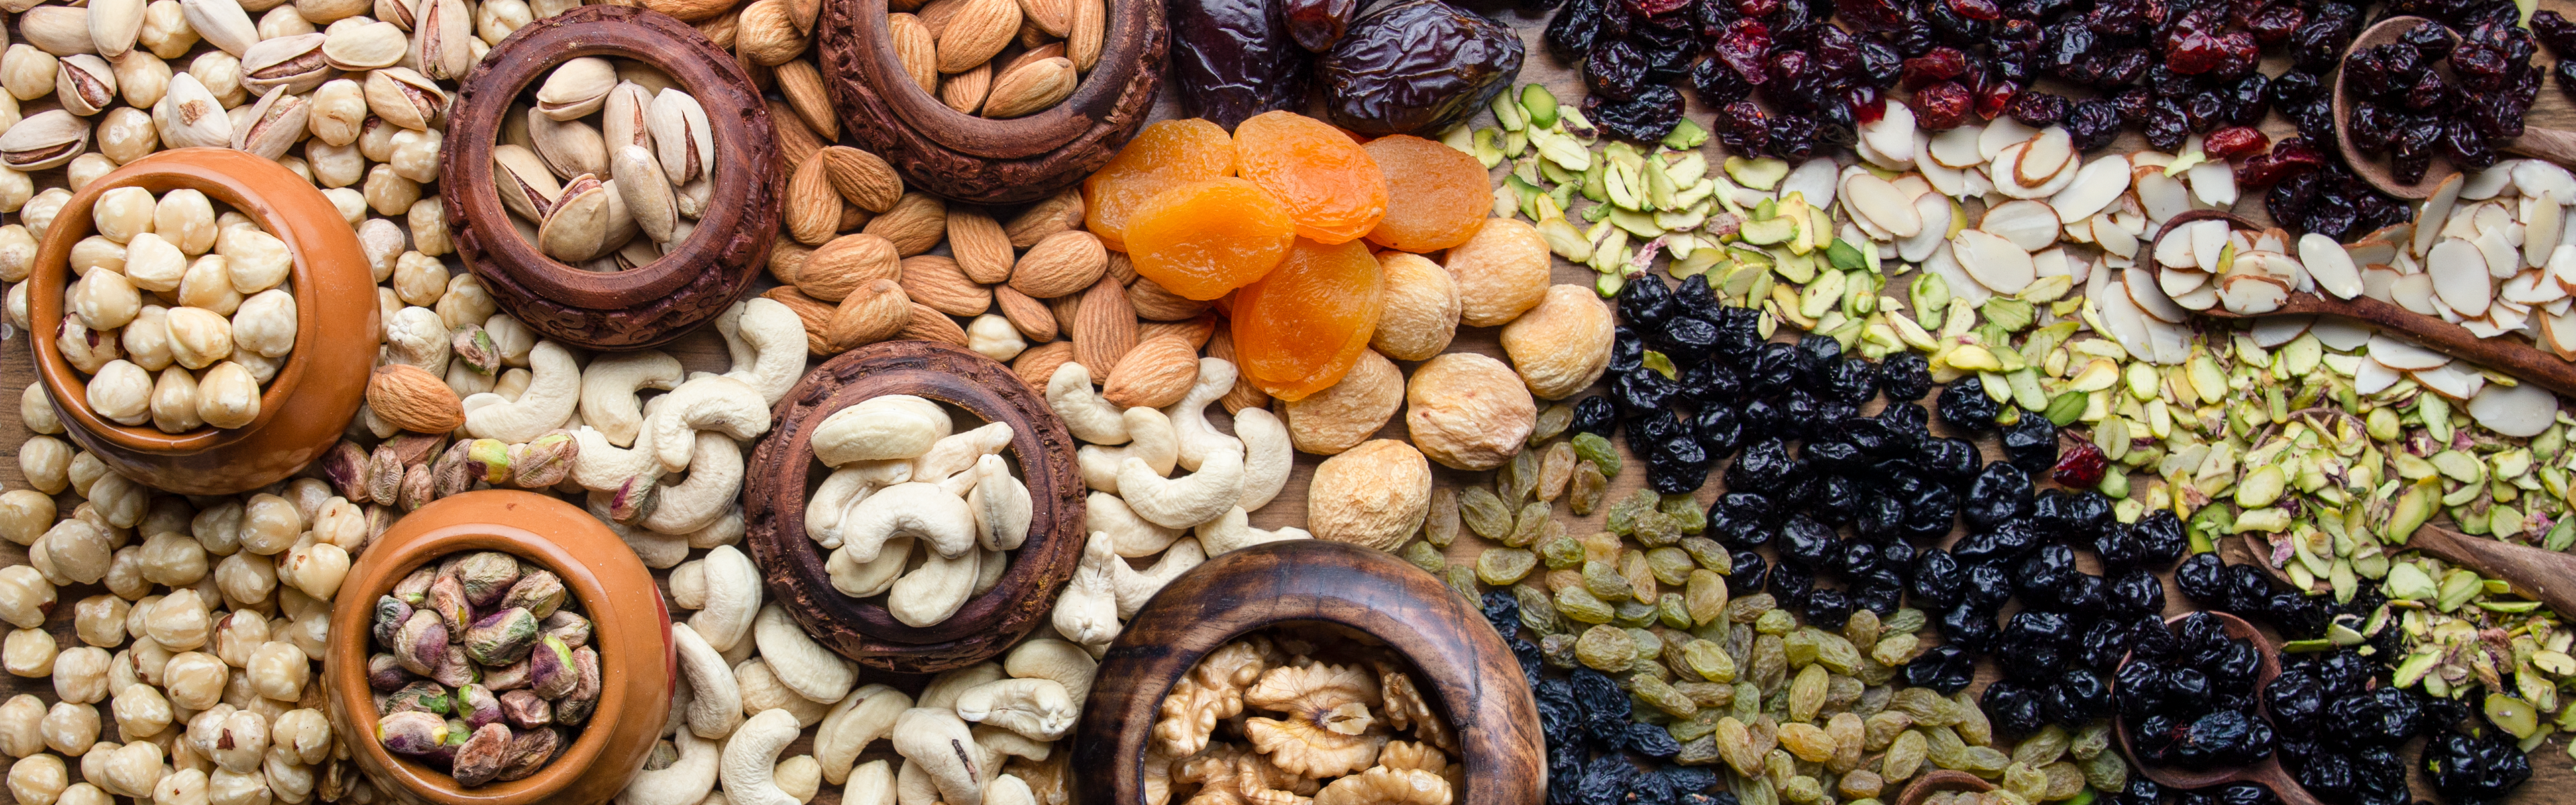 Fresh, Crunchy Dry Fruit & Nuts directly sourced from farms 